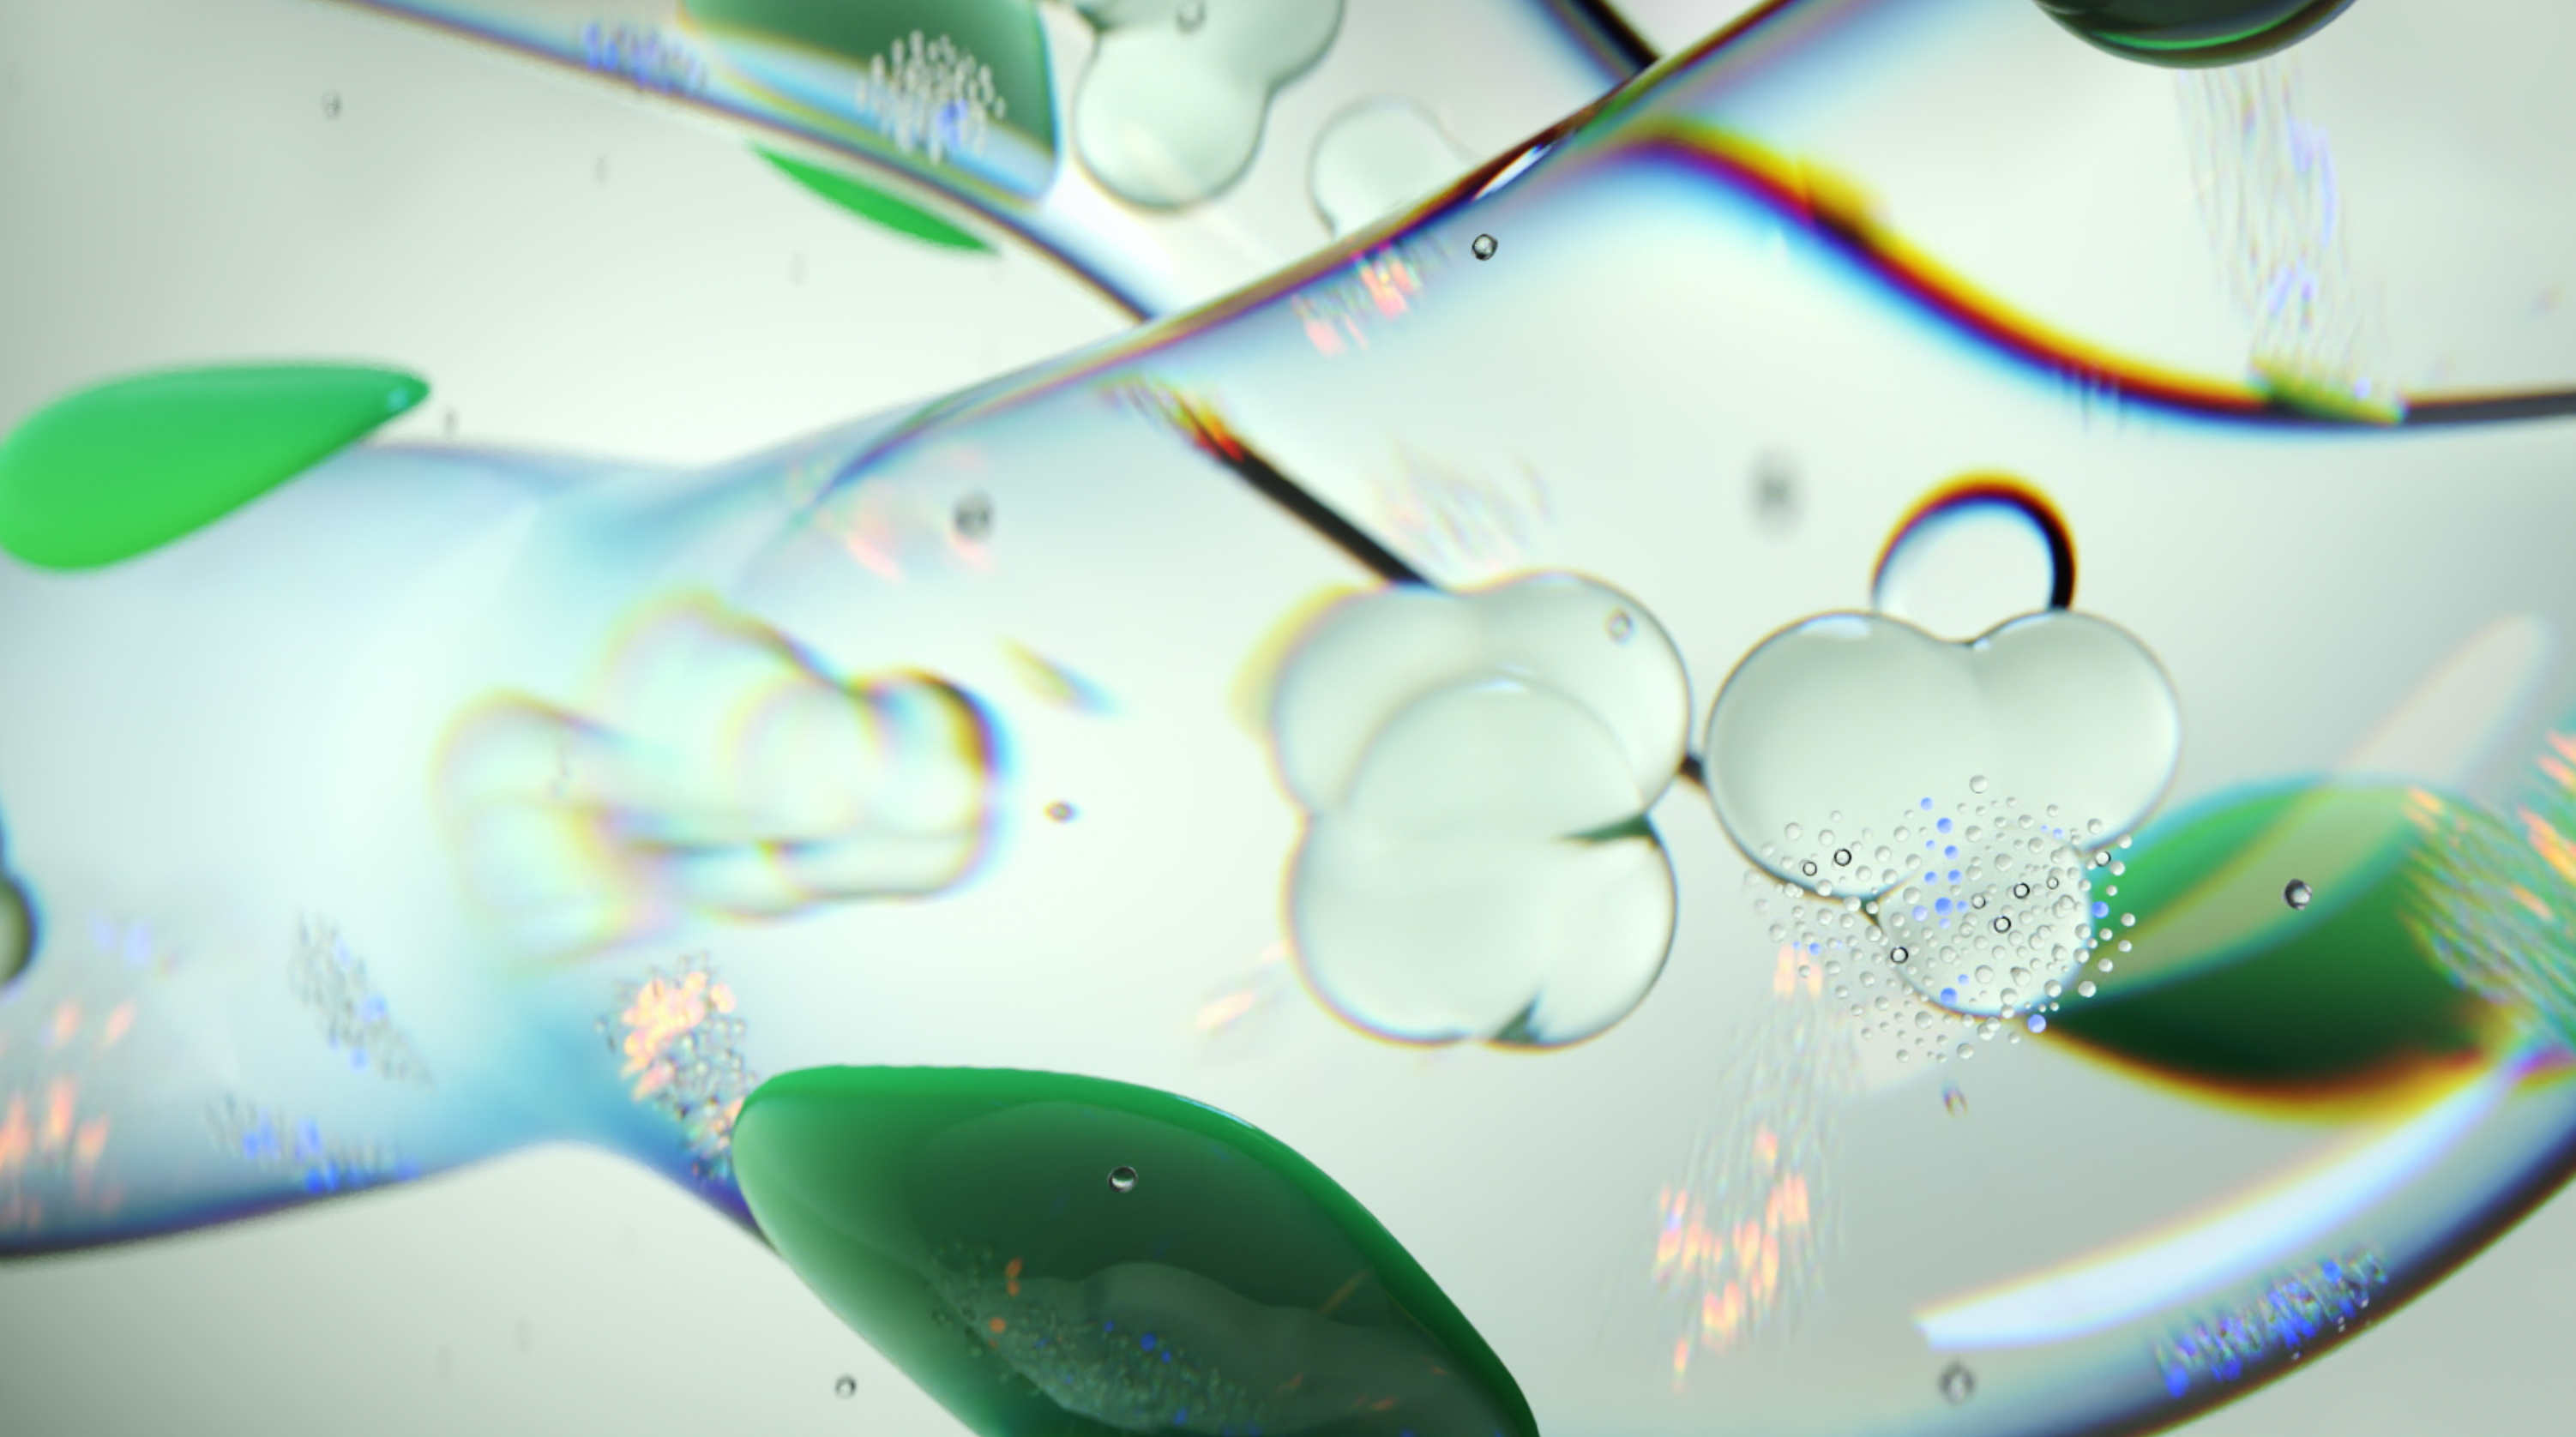 A close-up of a transparent gel-like substance with suspended green and clear droplets. The surface reflects light with a prism-like effect, creating a visually dynamic image. Small bubbles are also visible within the gel. The background is blurred.